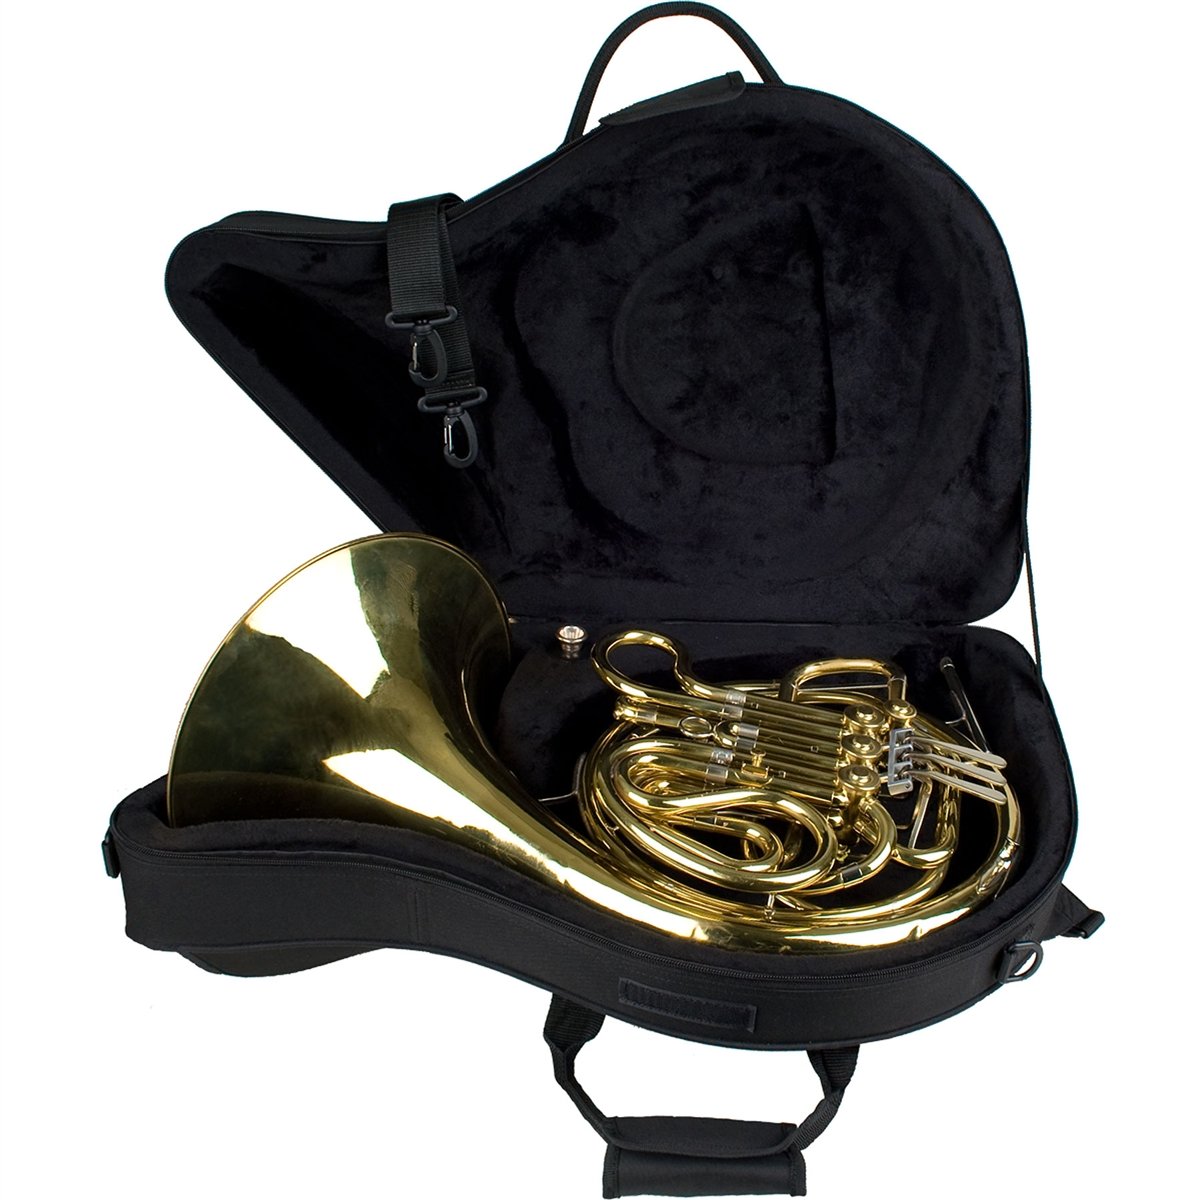 Protec - French Horn Fixed Bell MAX Case (Contoured)-Case-Protec-Music Elements